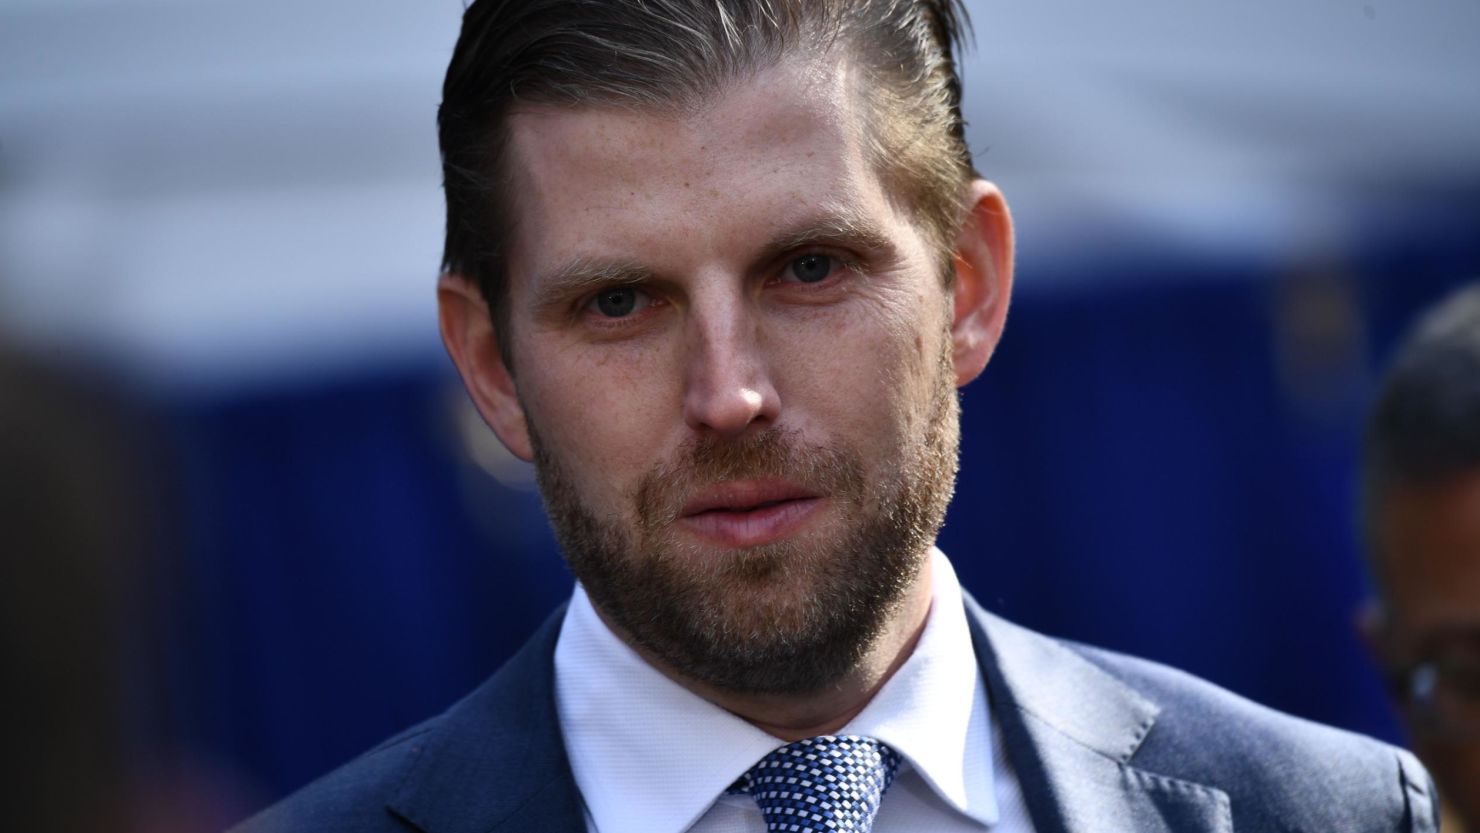 In this November 11, 2019, file photo, Eric Trump arrives as President Donald Trump and first lady Melania Trump participate in a wreath laying and deliver remarks at the New York City Veterans Day Parade.